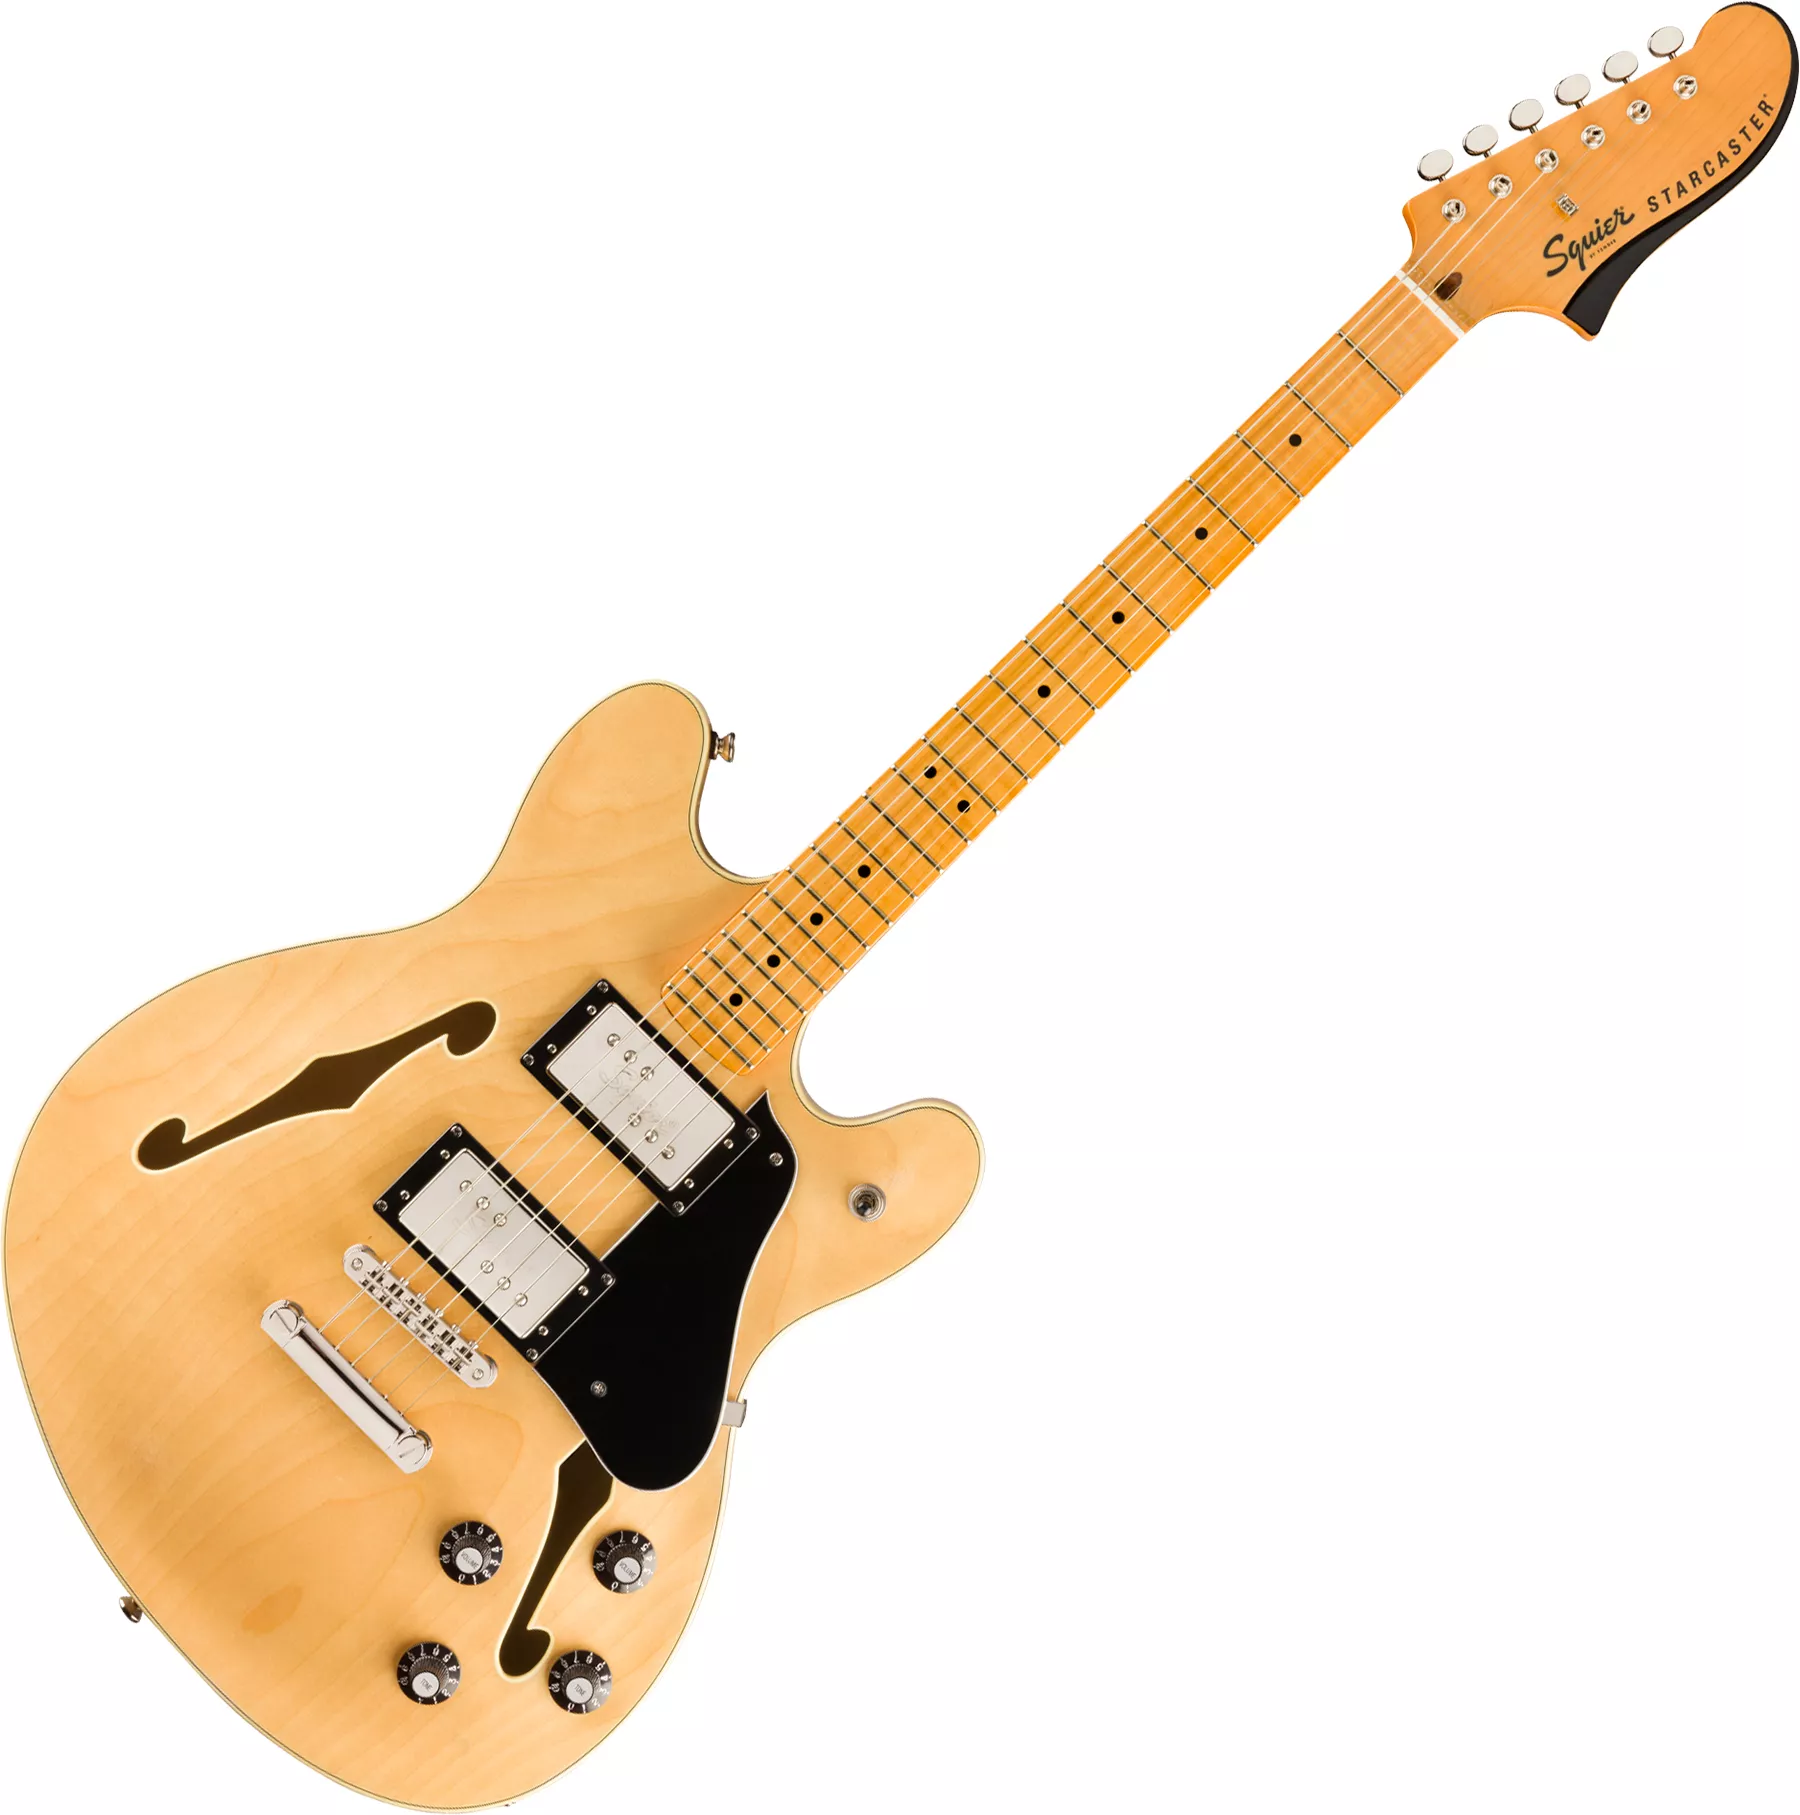 Squier Classic Vibe Starcaster - natural natural Semi-hollow